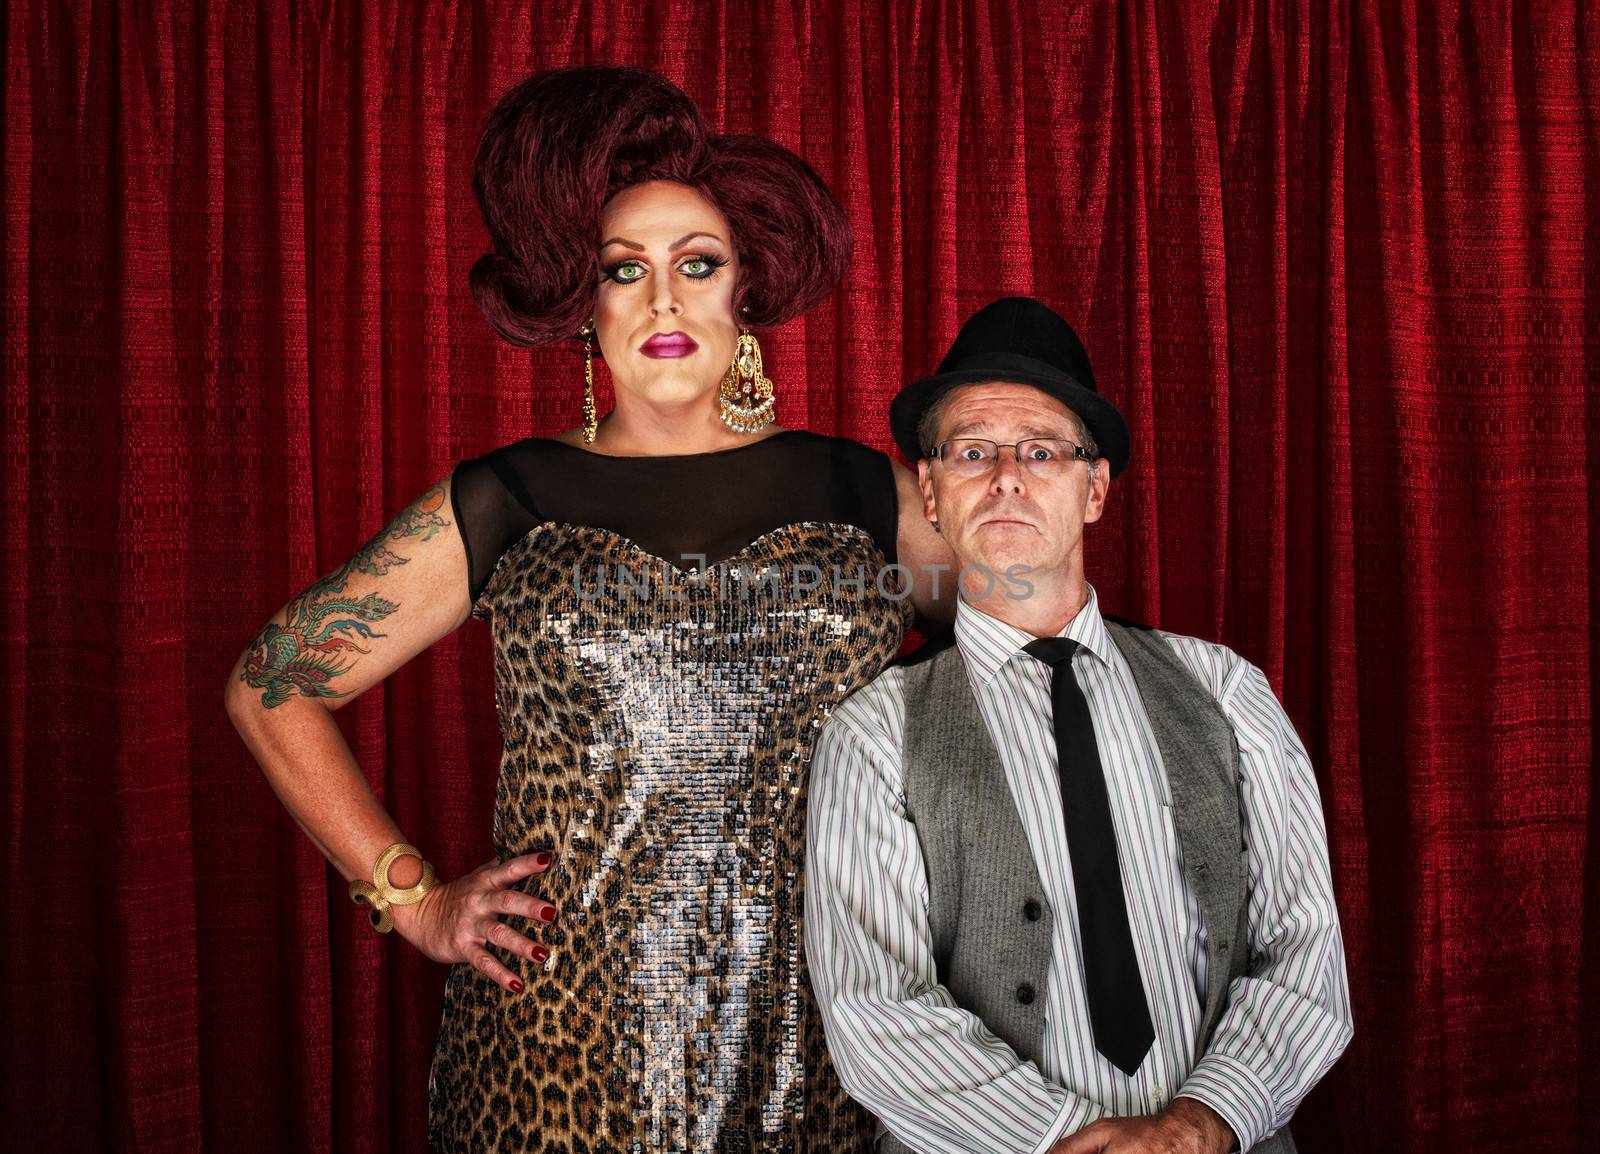 Odd couple drag queen with man at curtain